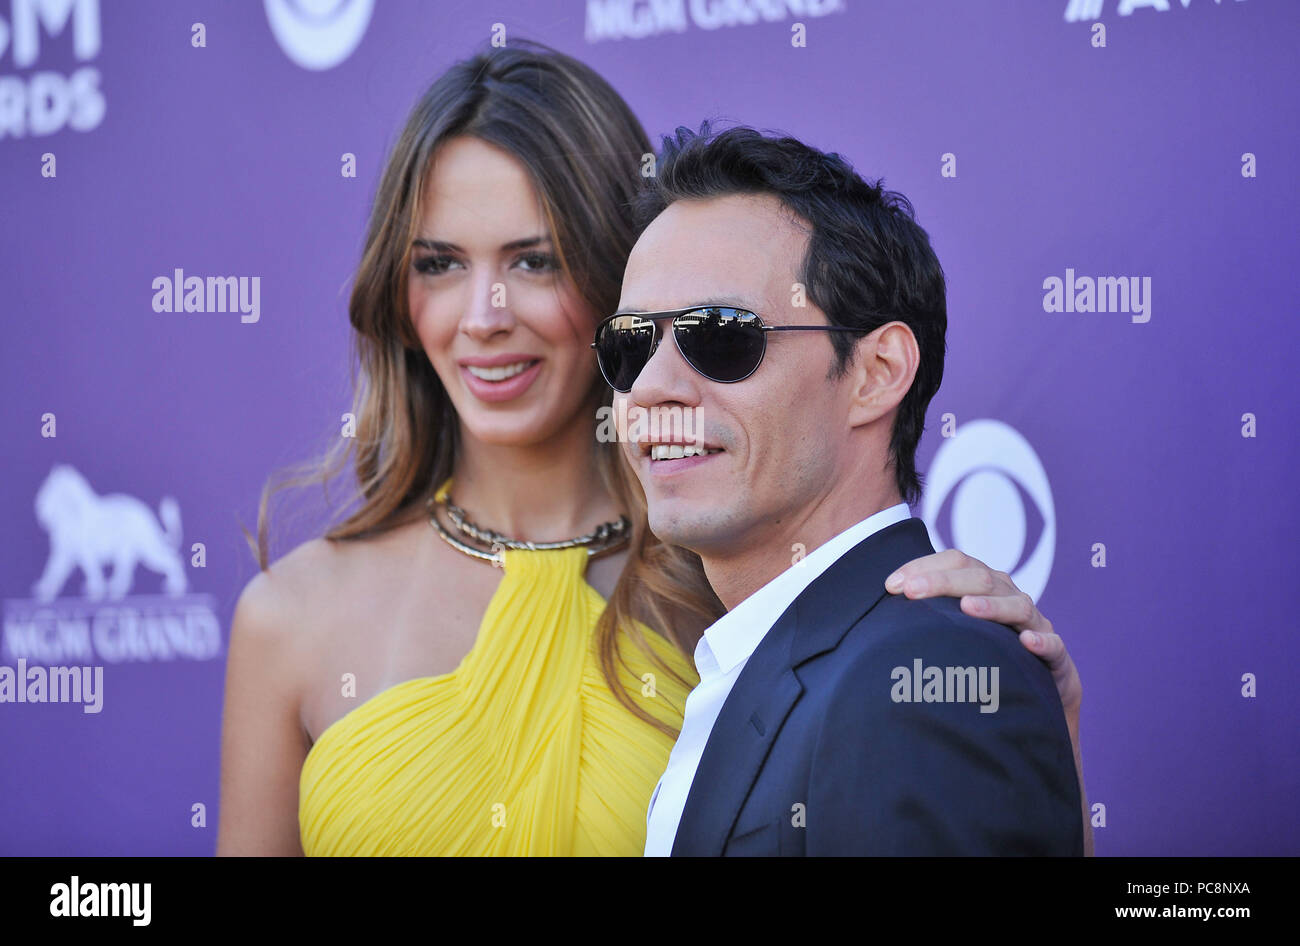 Shannon De Lima 023 Red Carpet Event High Resolution Stock Photography And Images Alamy